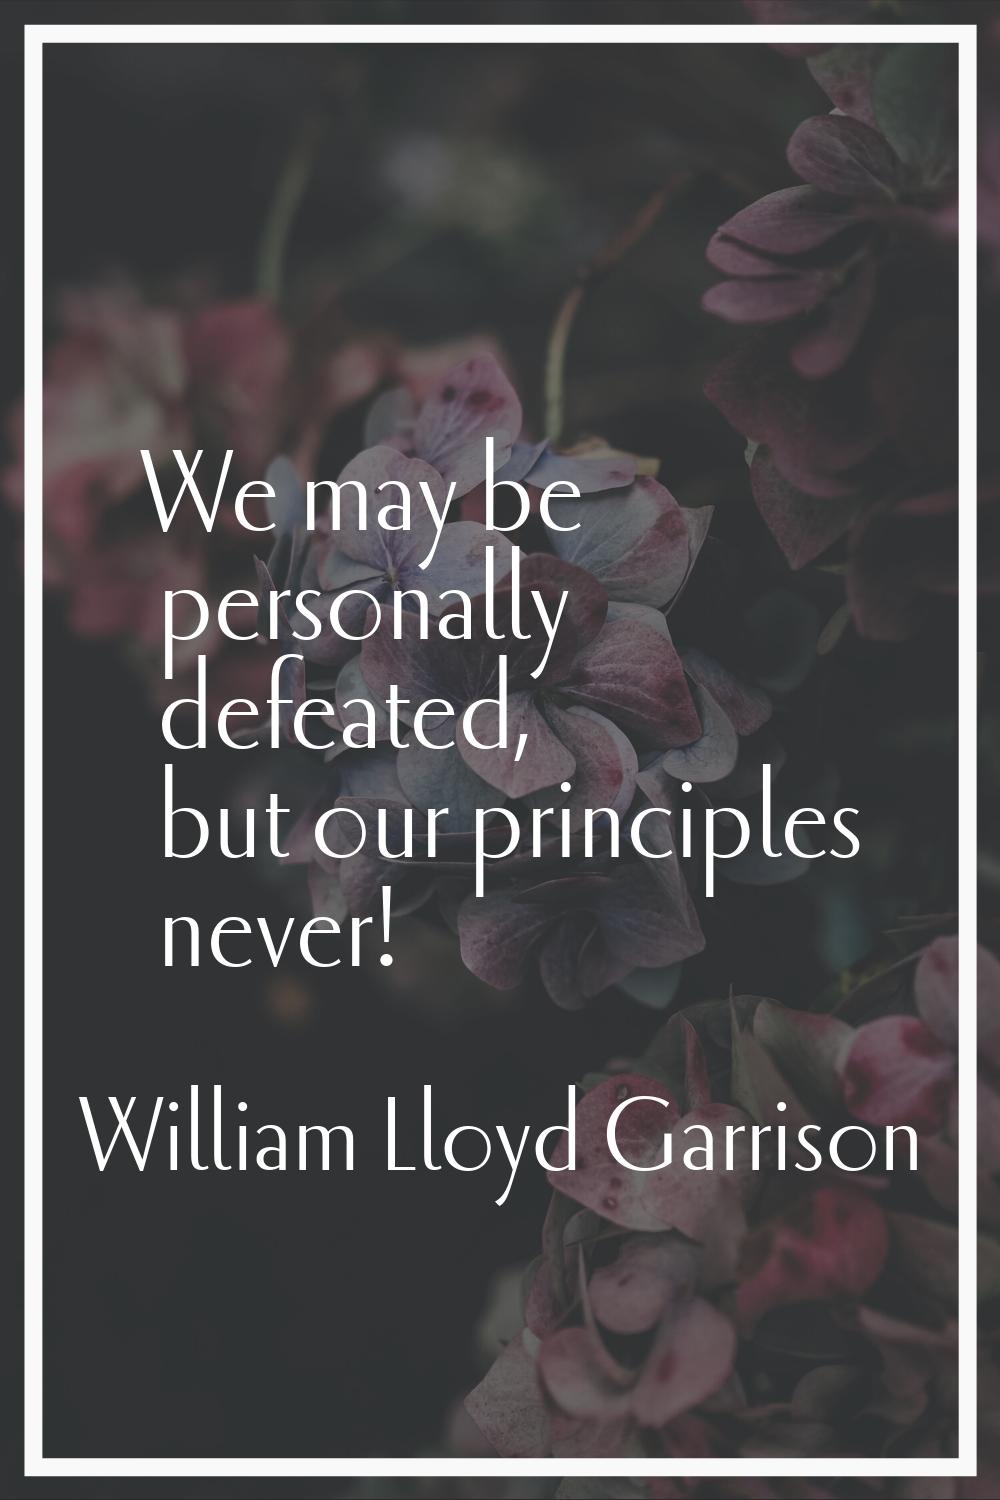 We may be personally defeated, but our principles never!